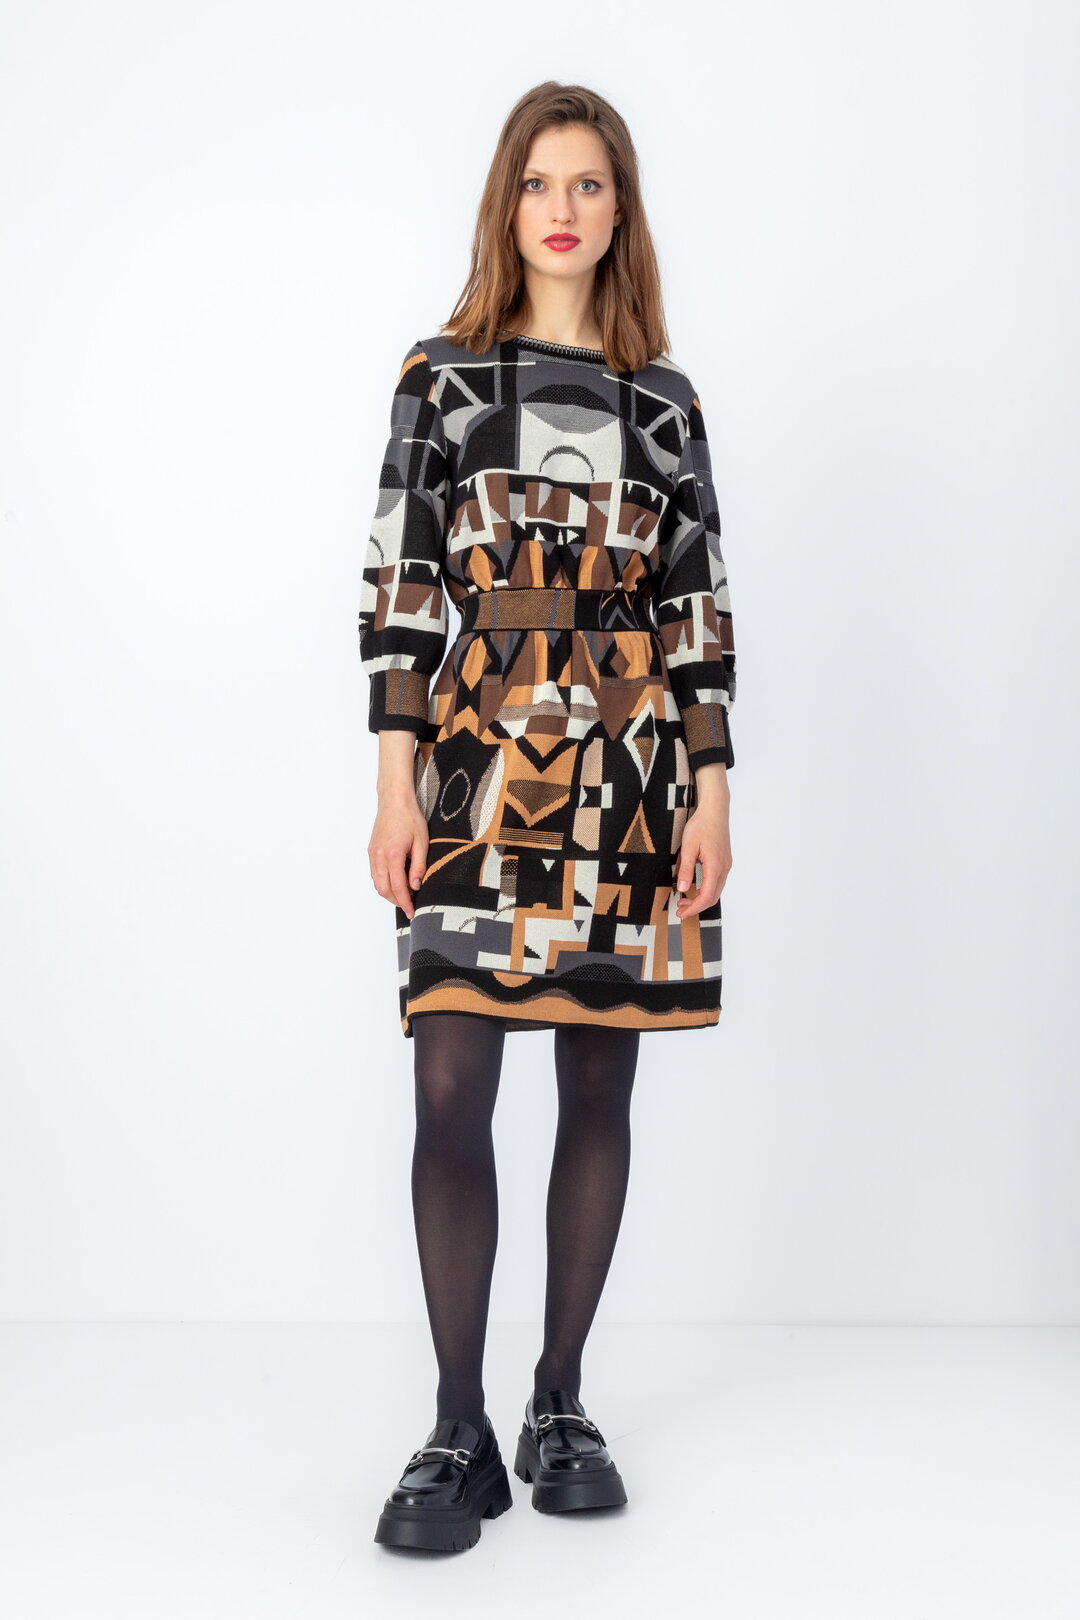 Dress, Abstract Pattern